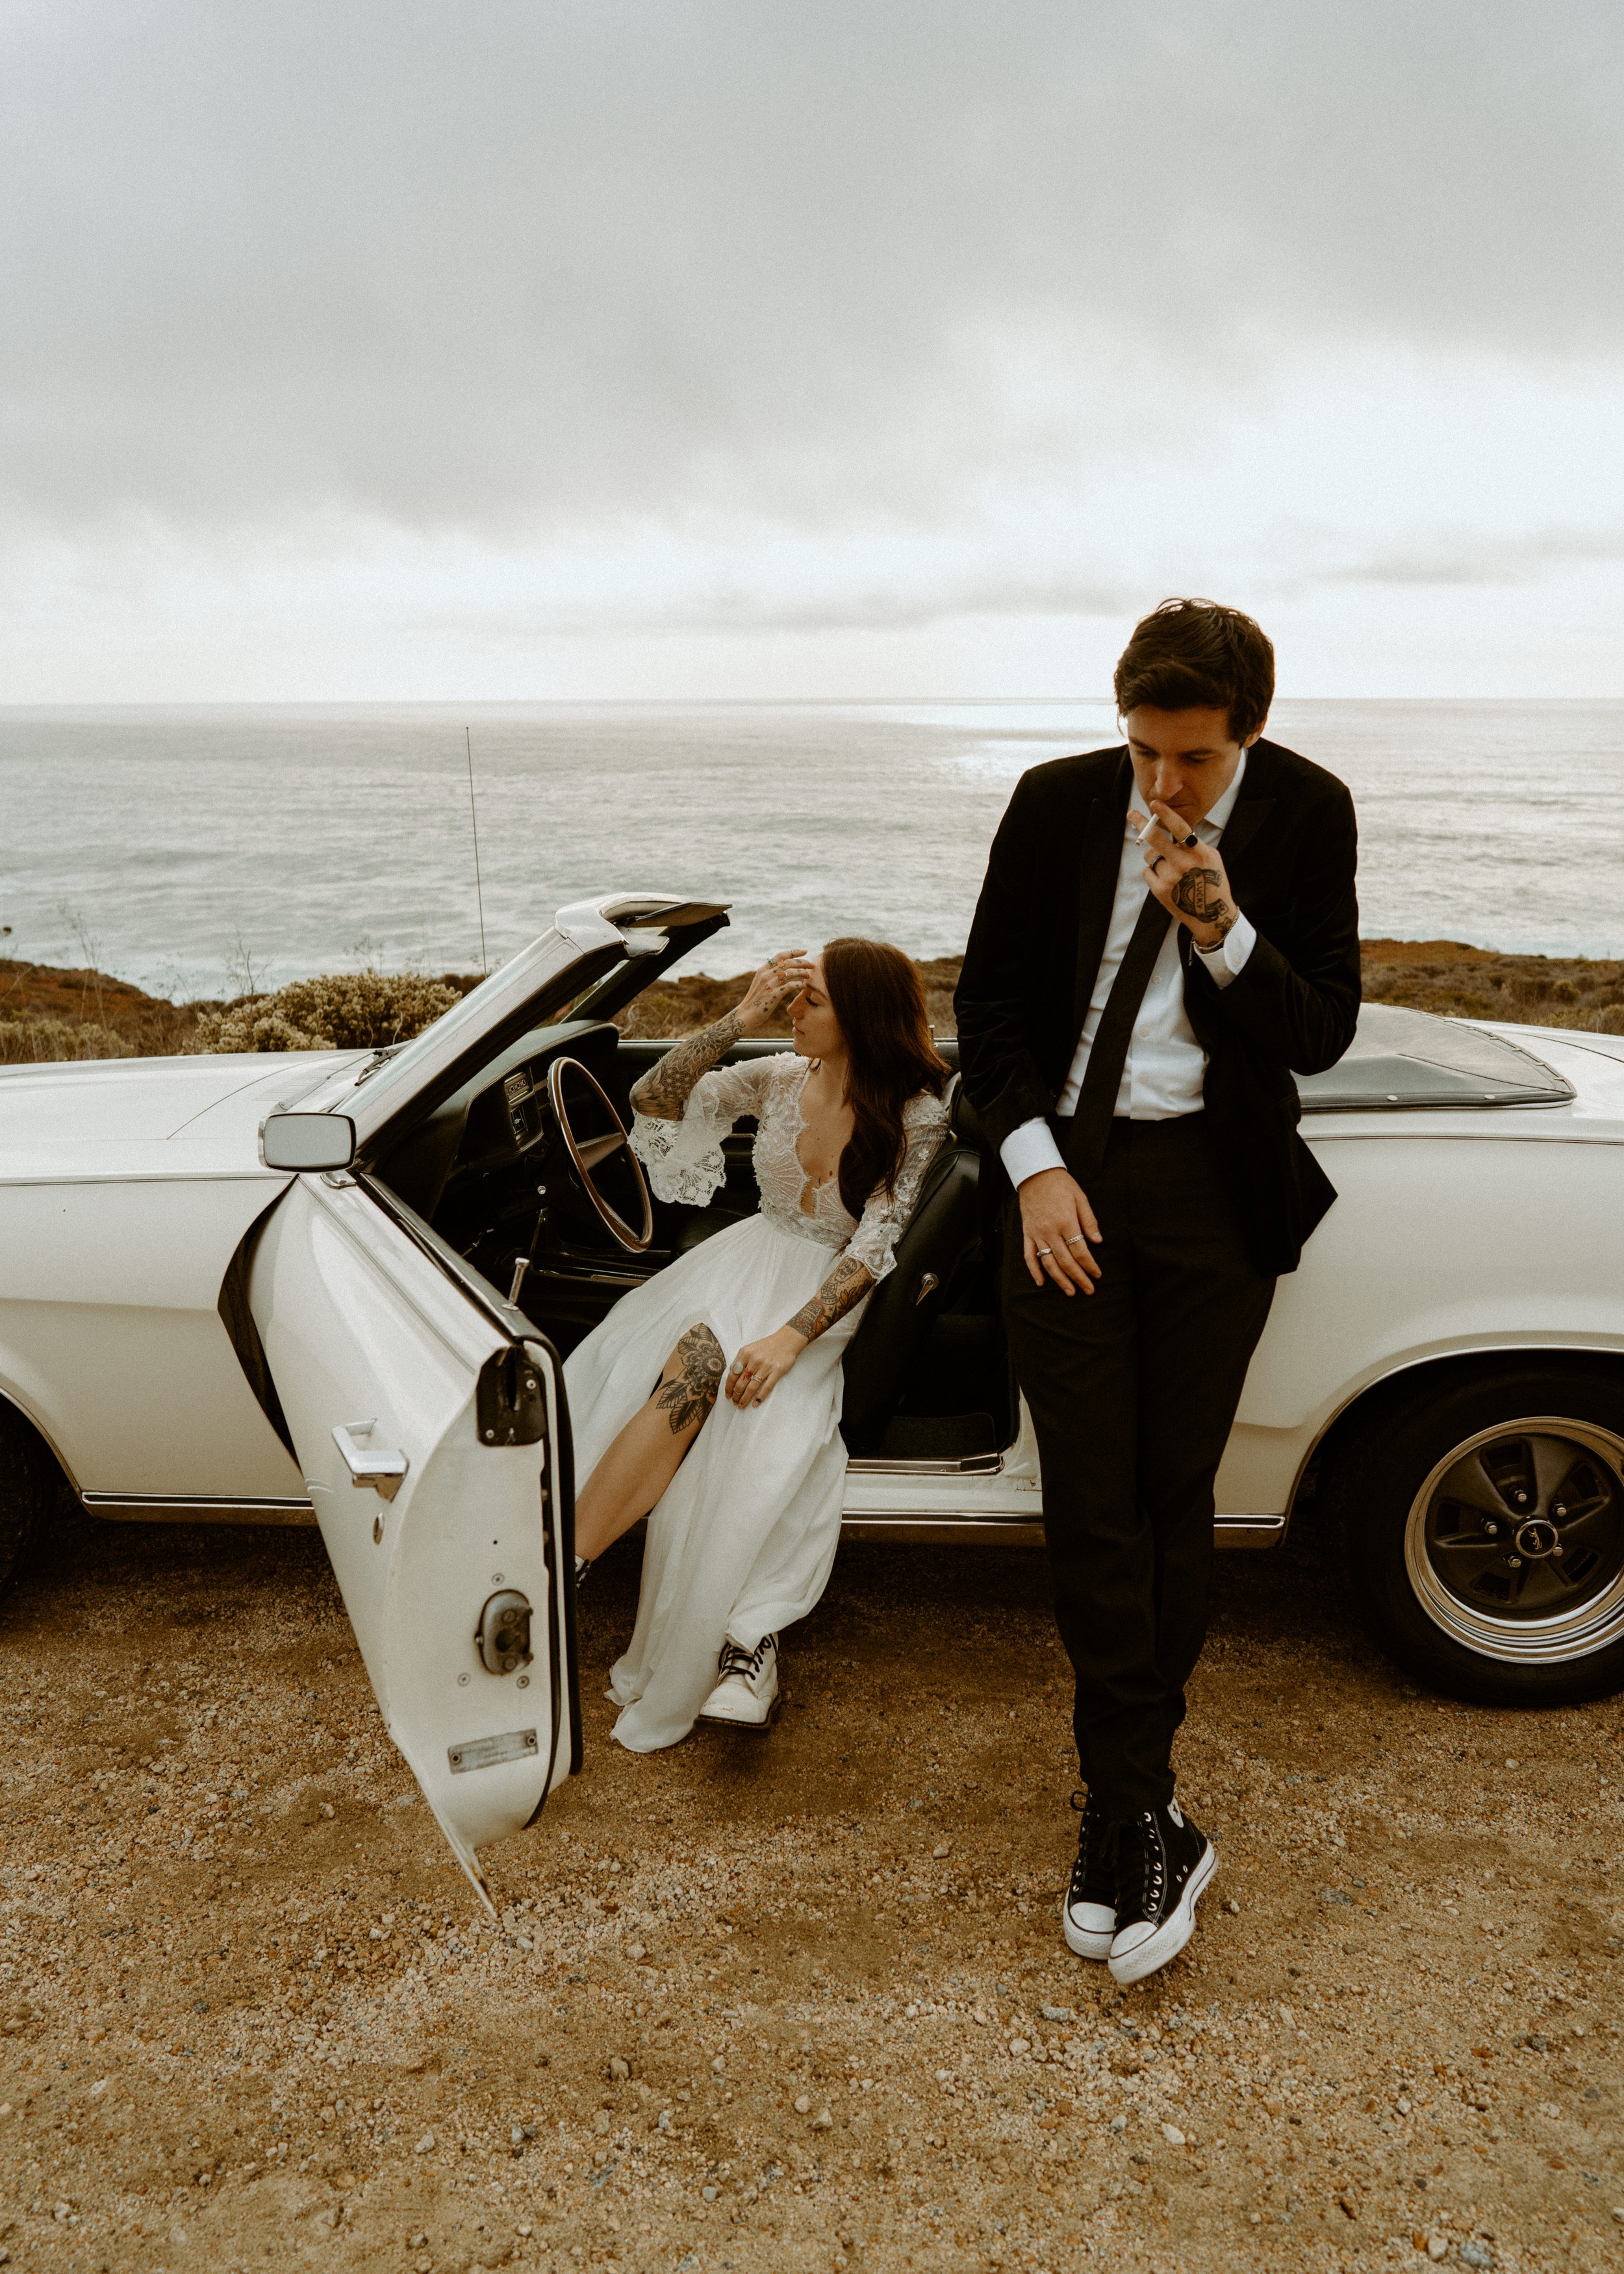 Vintage car elopement photos in Big Sur California | Nontraditional wedding photos | Big Sur elopement photographer | Bride and Groom with Tattoos